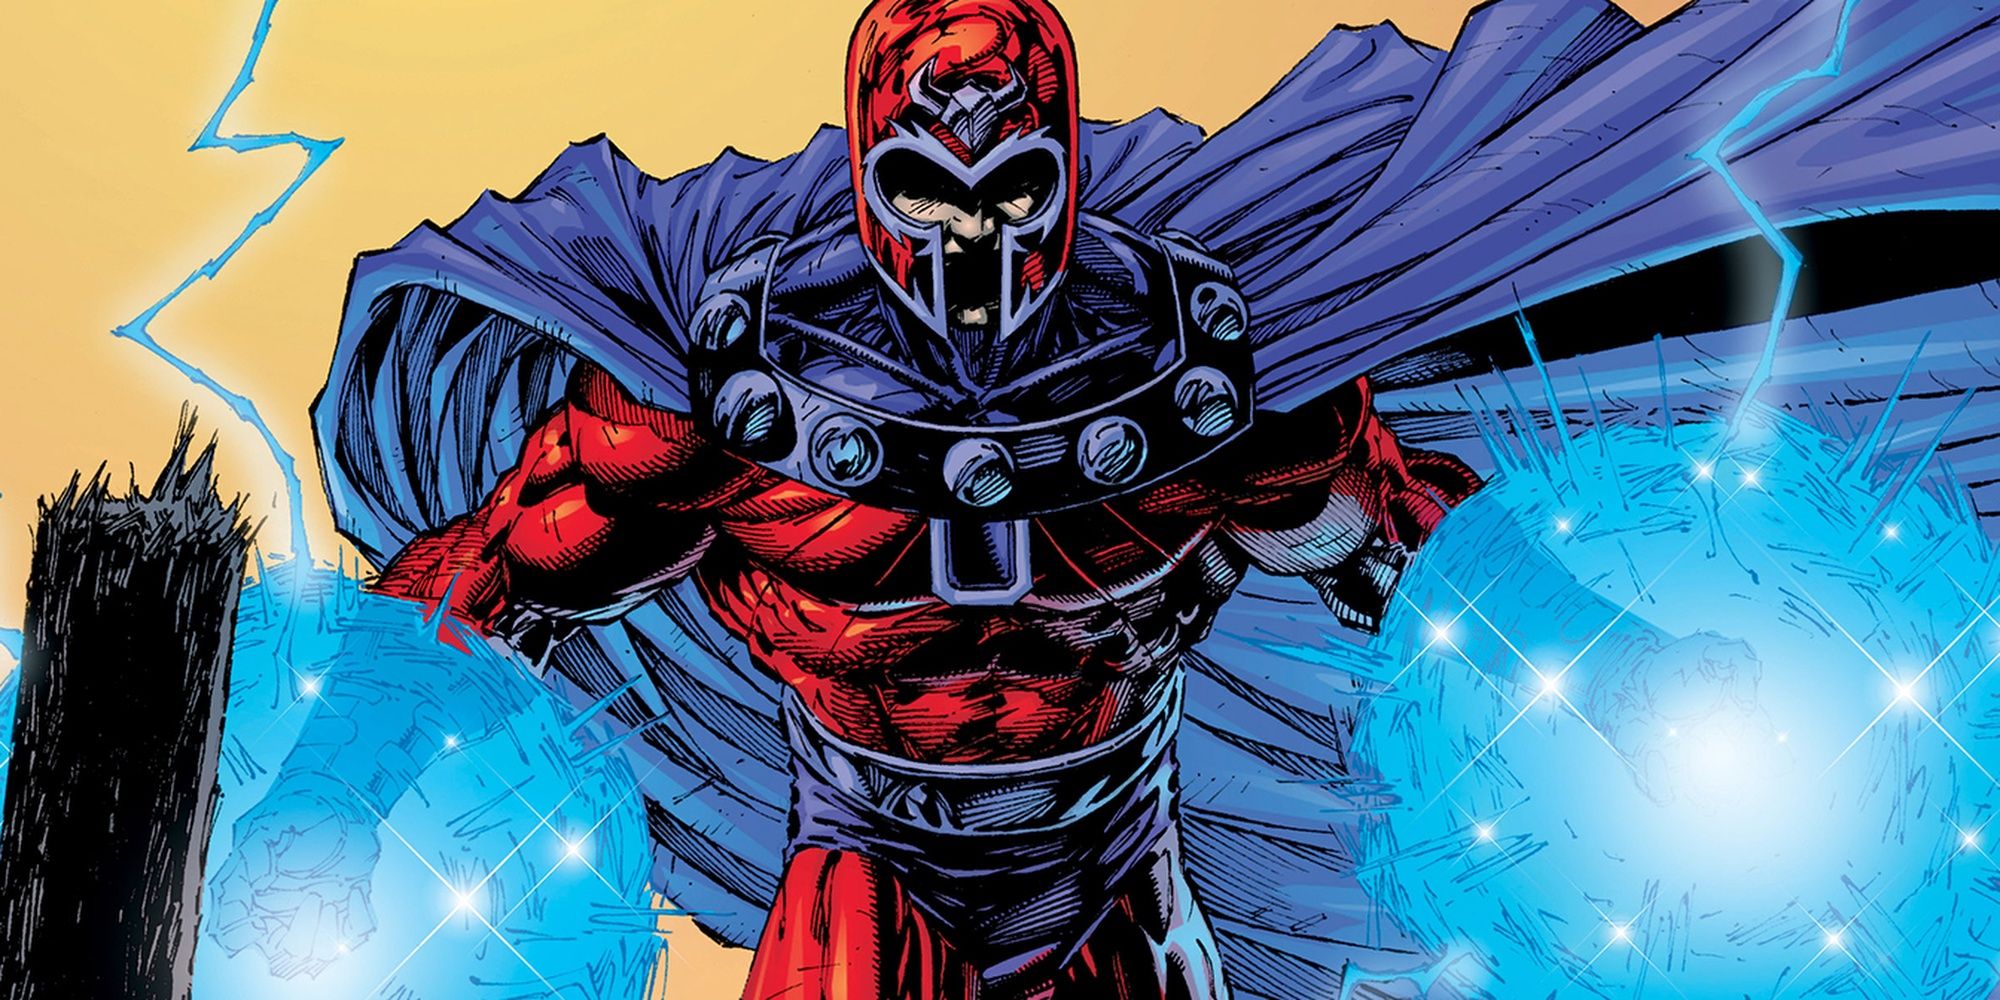 Magneto looking threatening while using his magnetosis powers